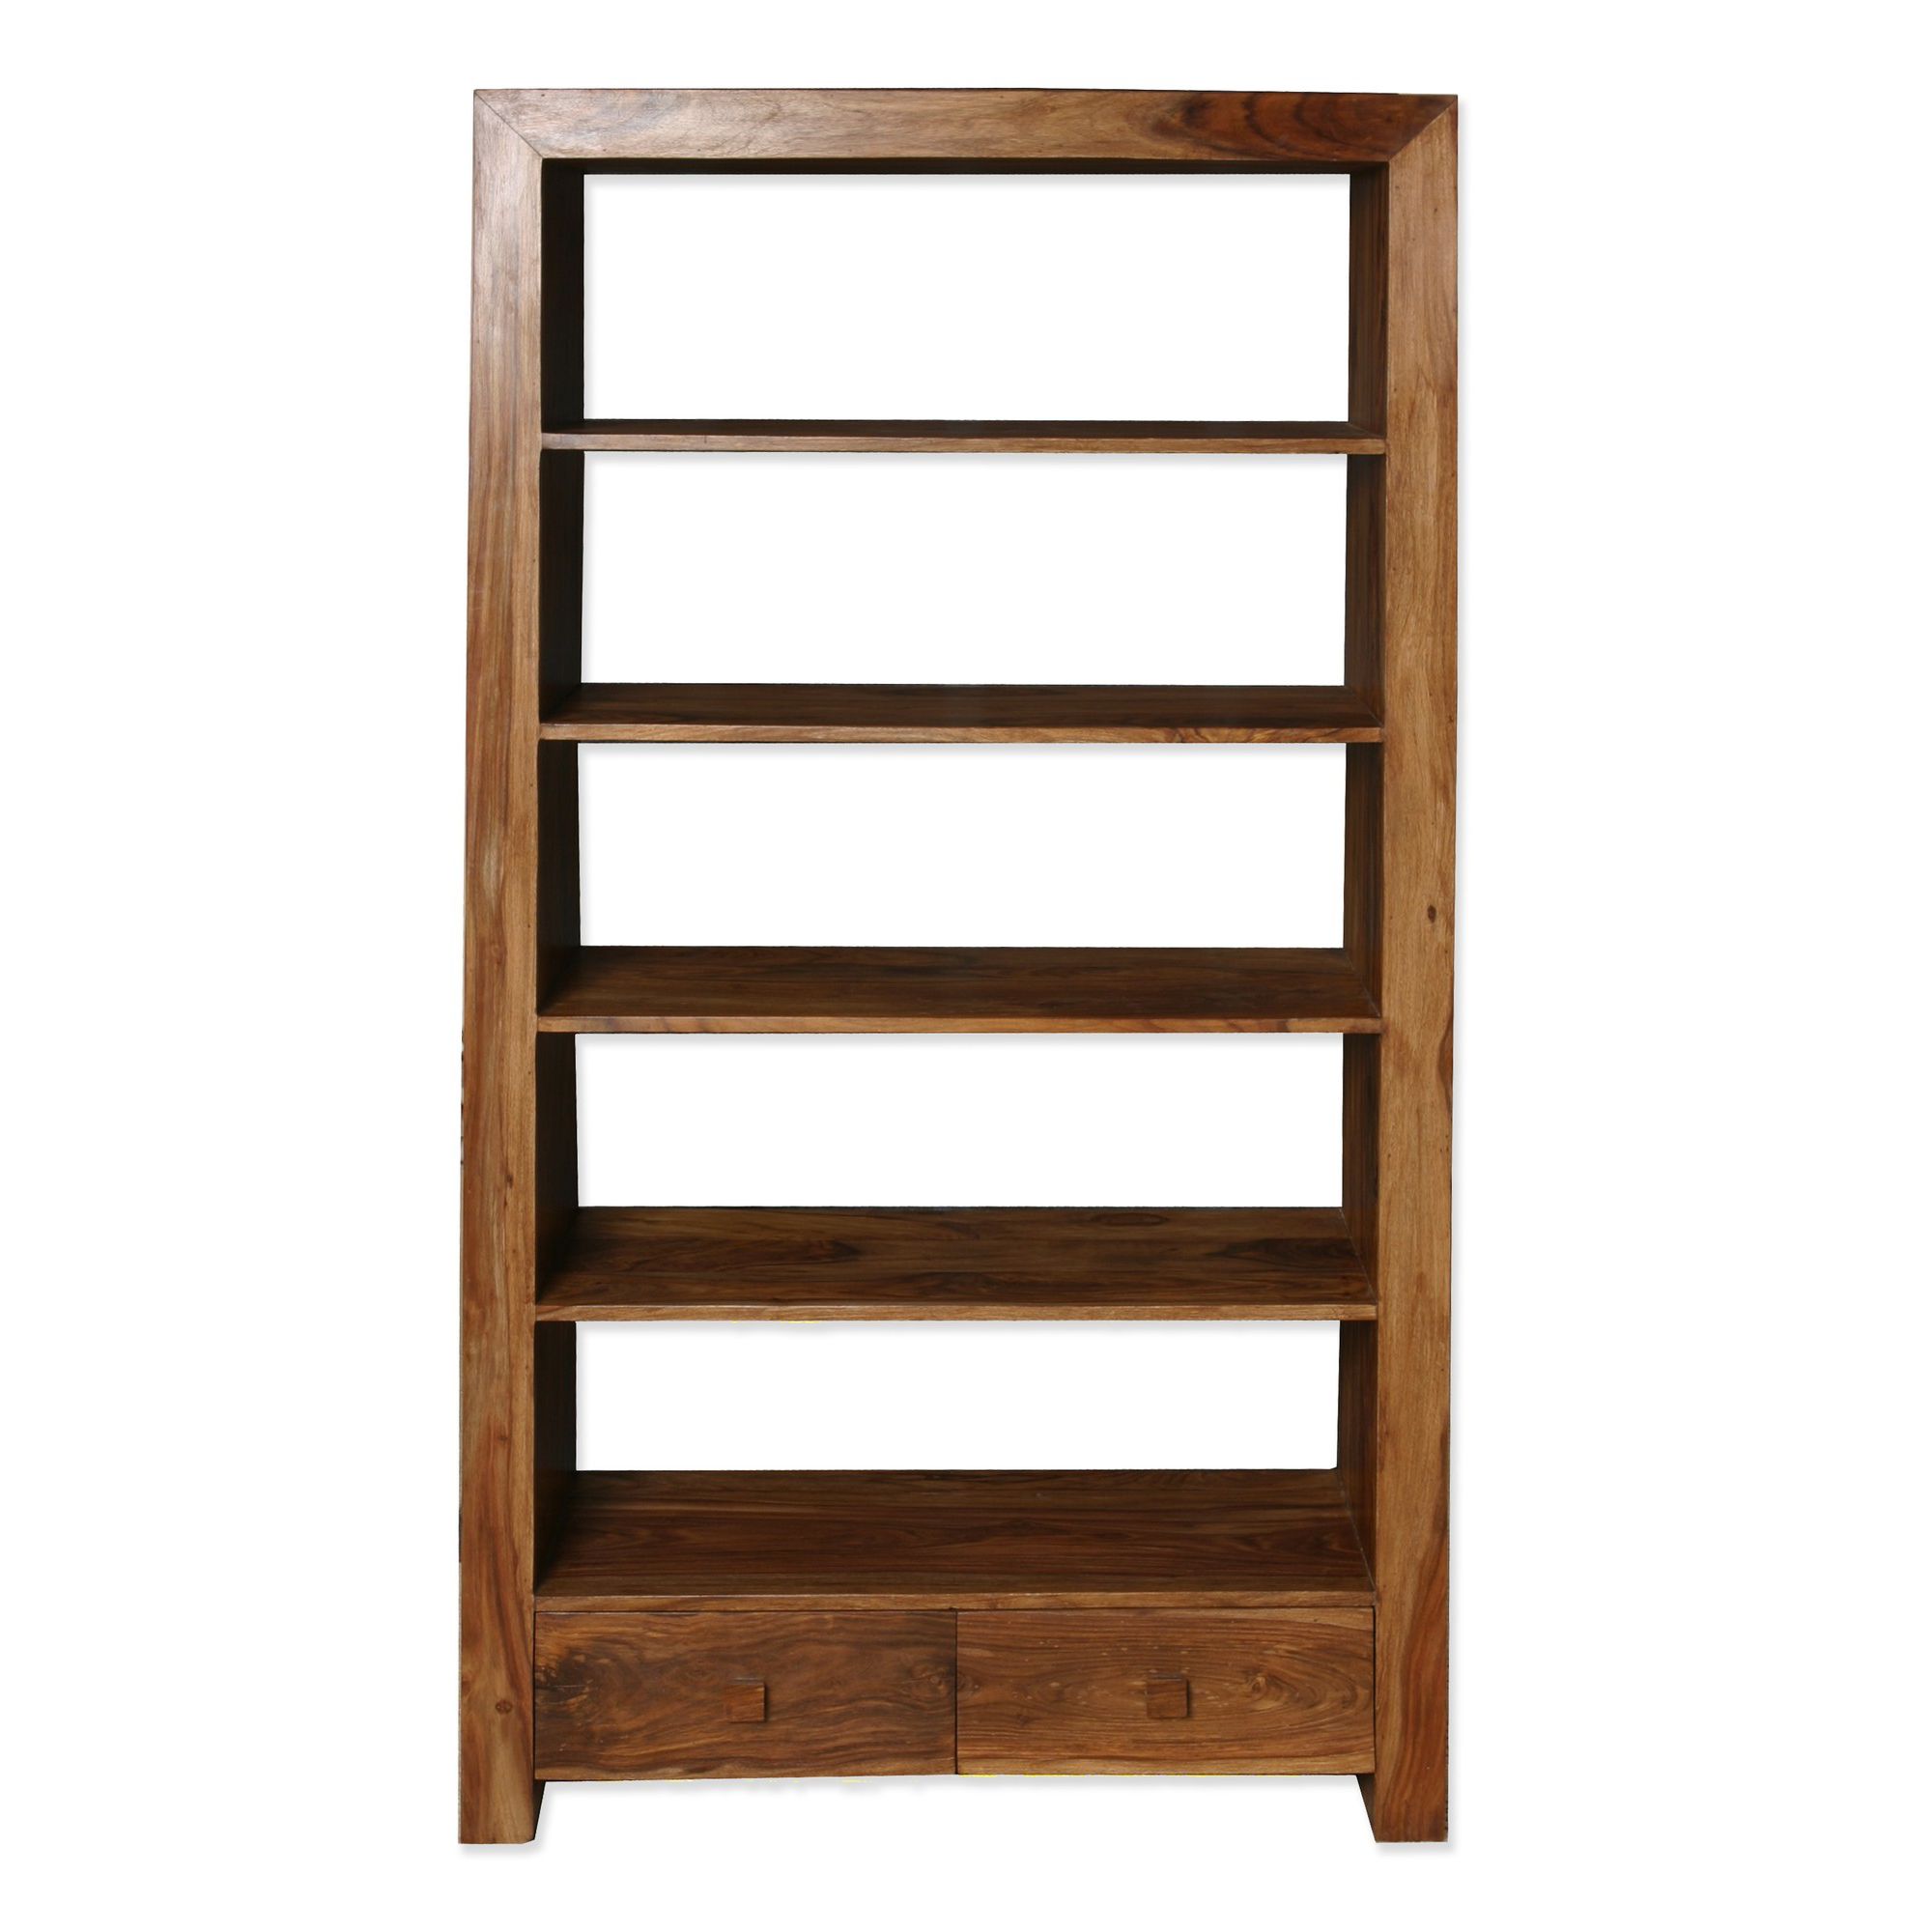 Elements Cubex Living Bookcase in Warm Lacquer at Tescos Direct